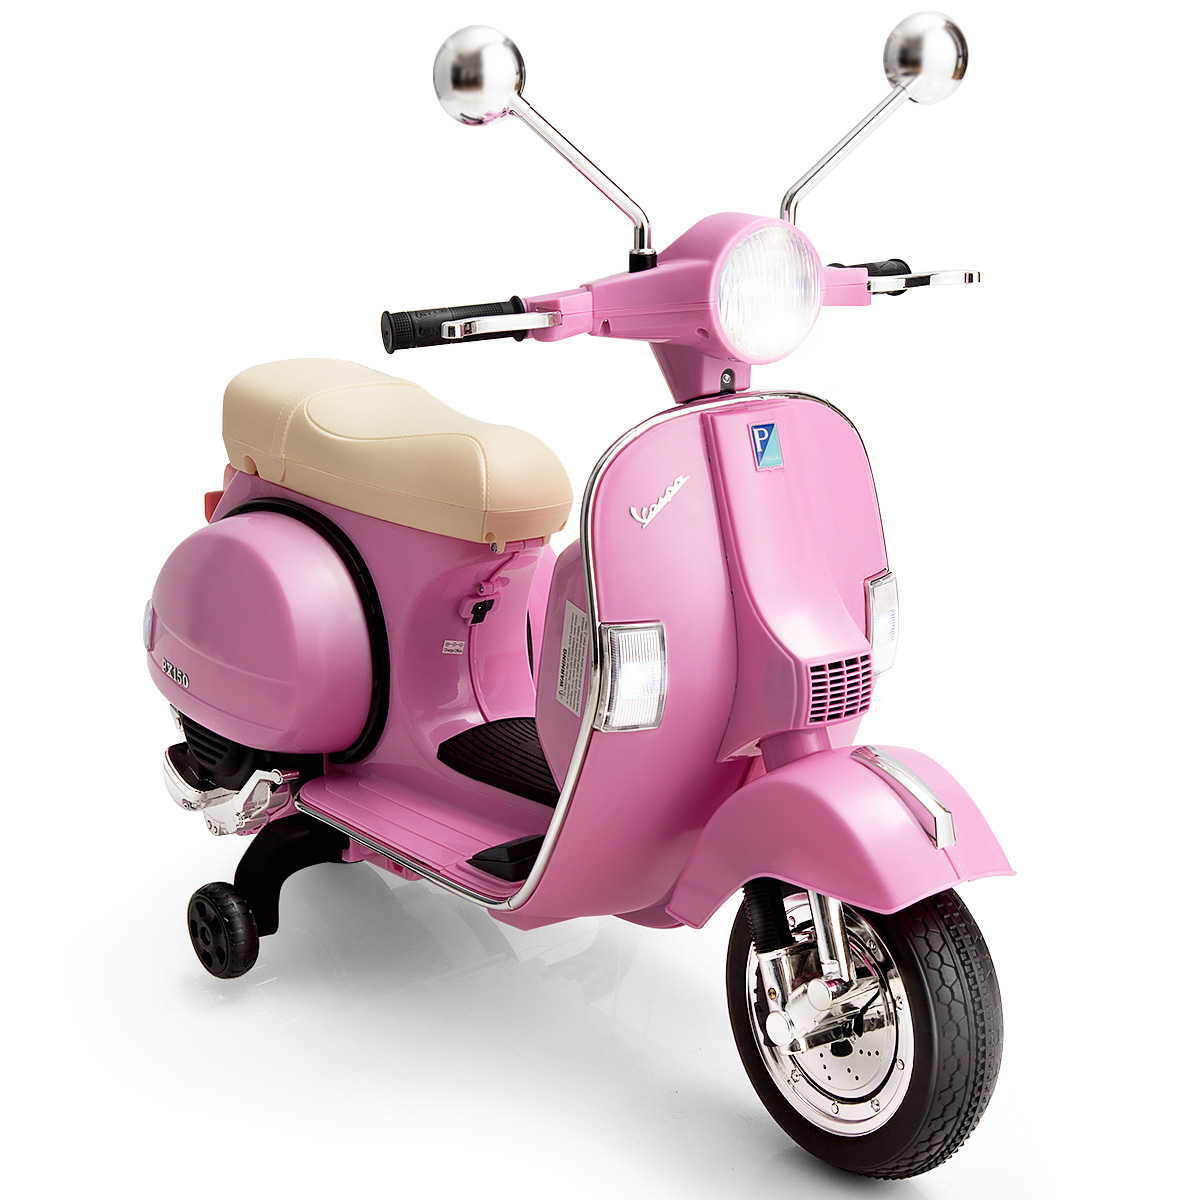 Costway Kids Vespa Scooter, 6V Rechargeable Ride on Motorcycle w/Training Wheels Pink - image 3 of 9